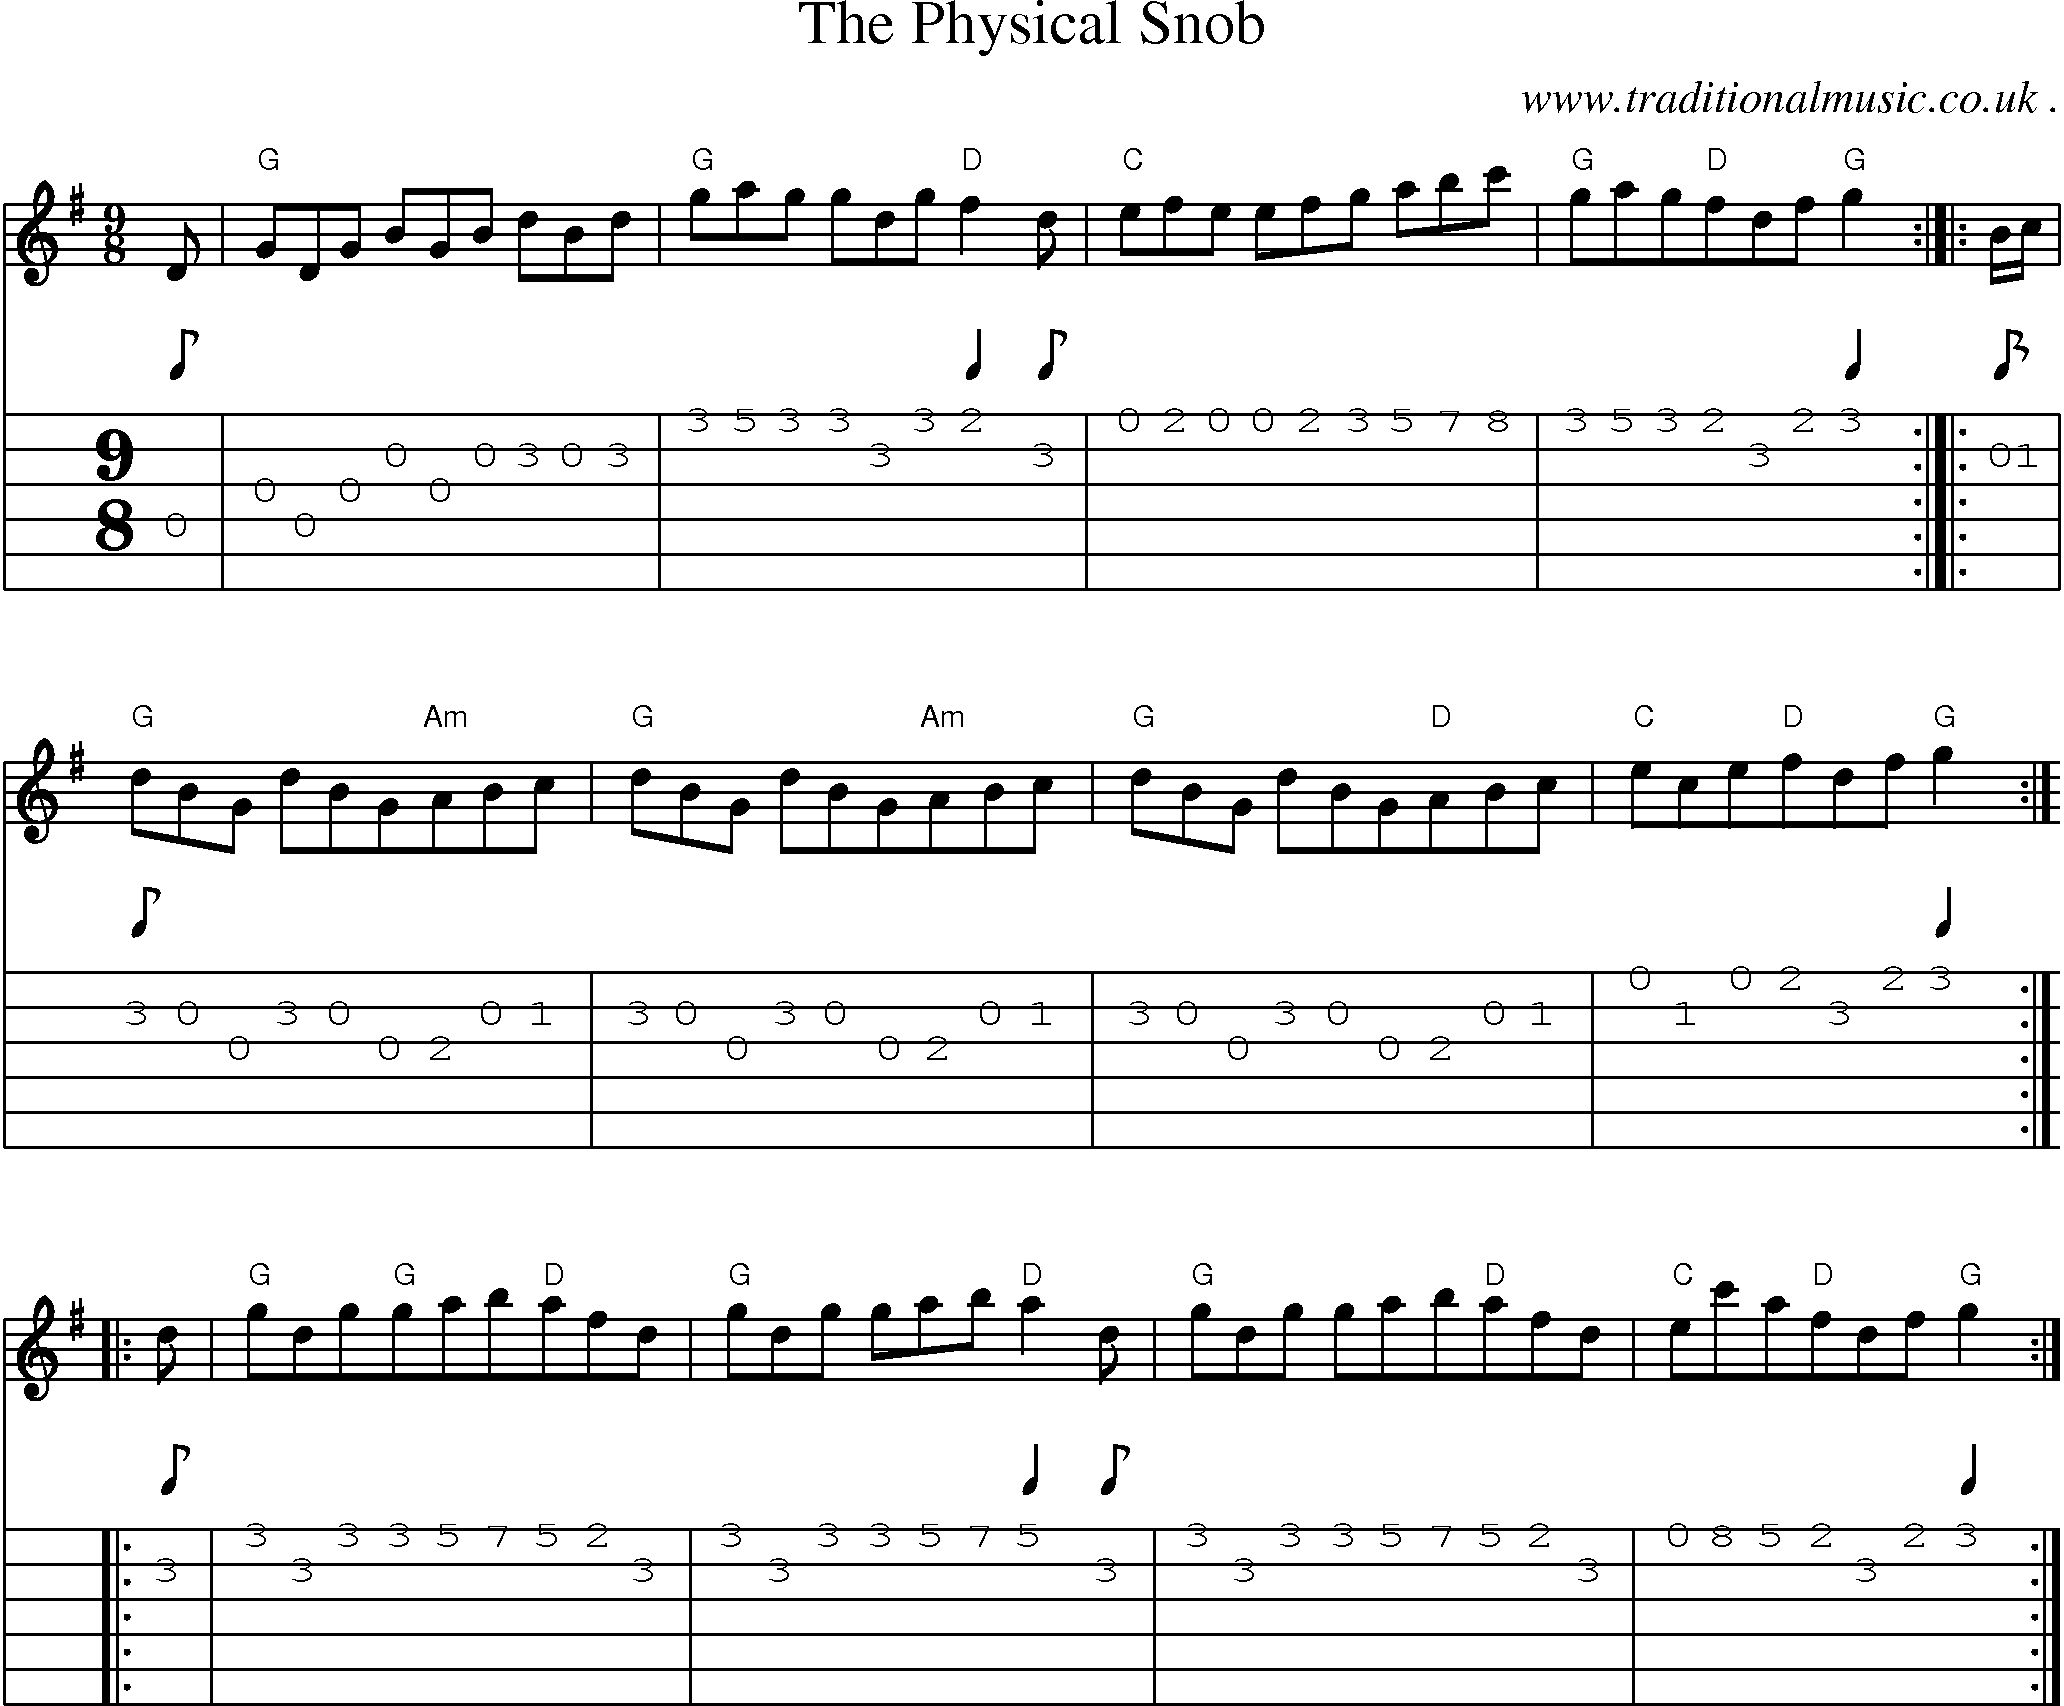 Sheet-Music and Guitar Tabs for The Physical Snob